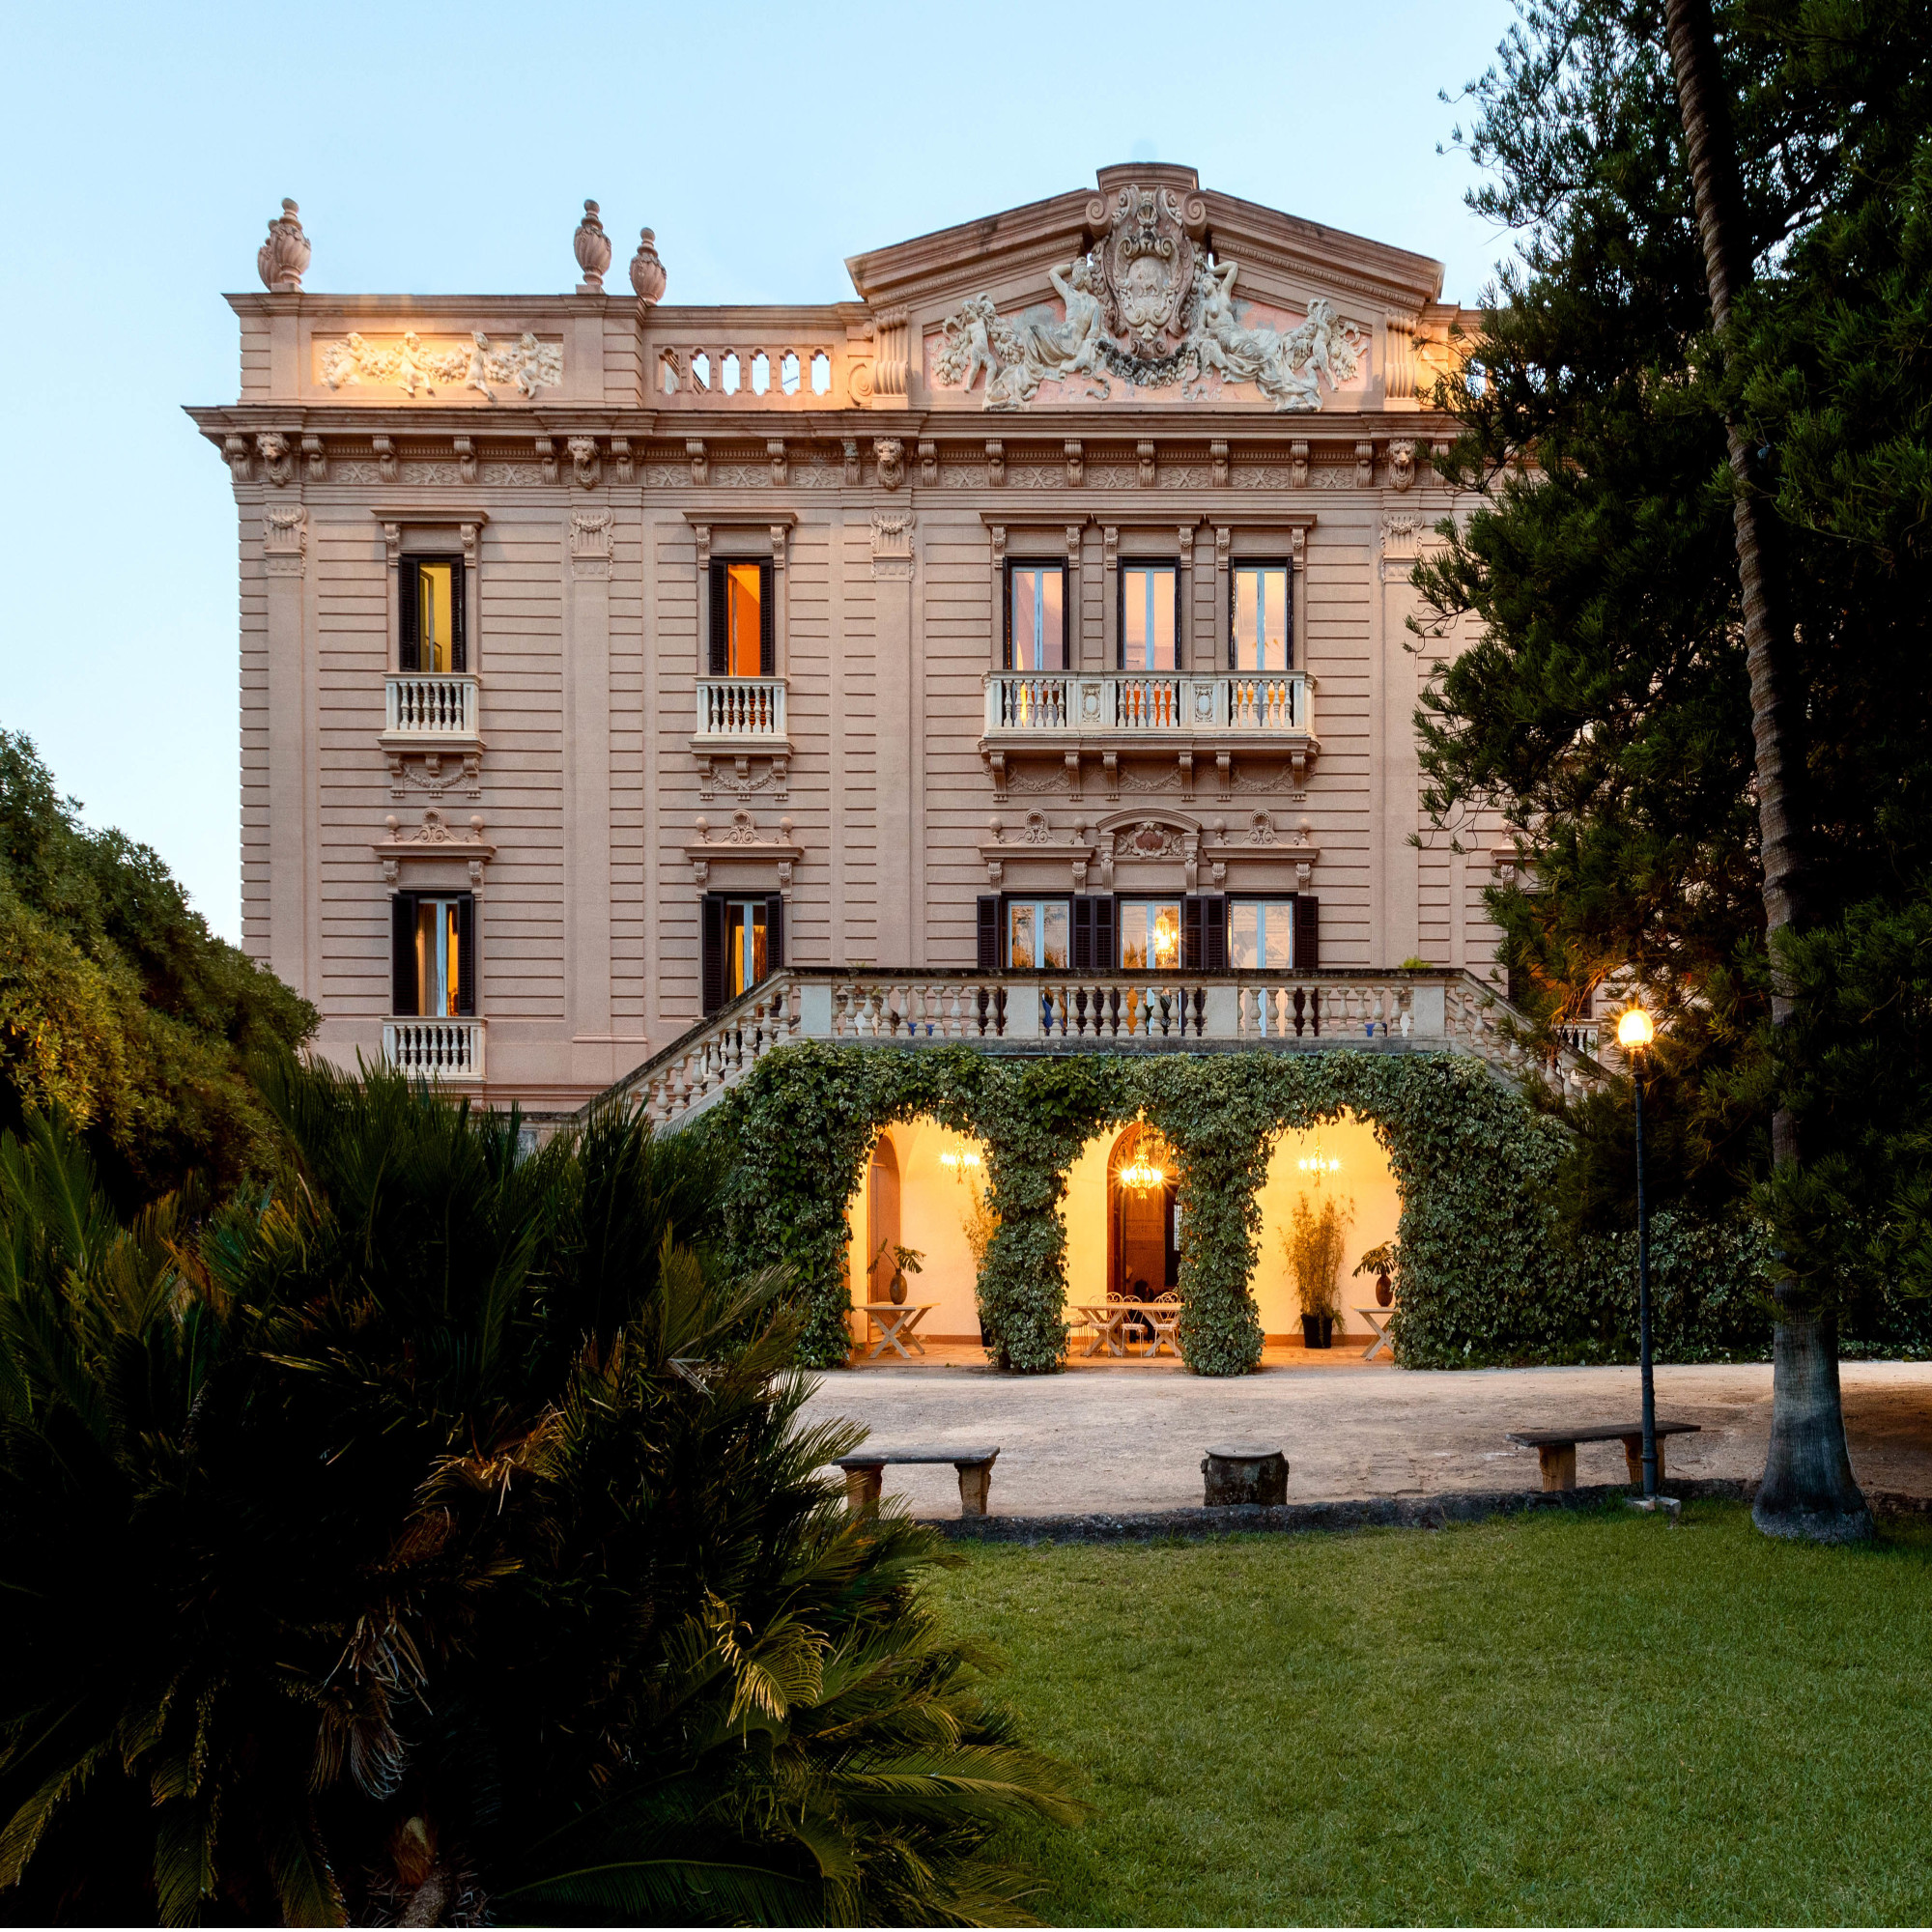 The luxury Italian villa from hit series The White Lotus is available to rent on Airbnb